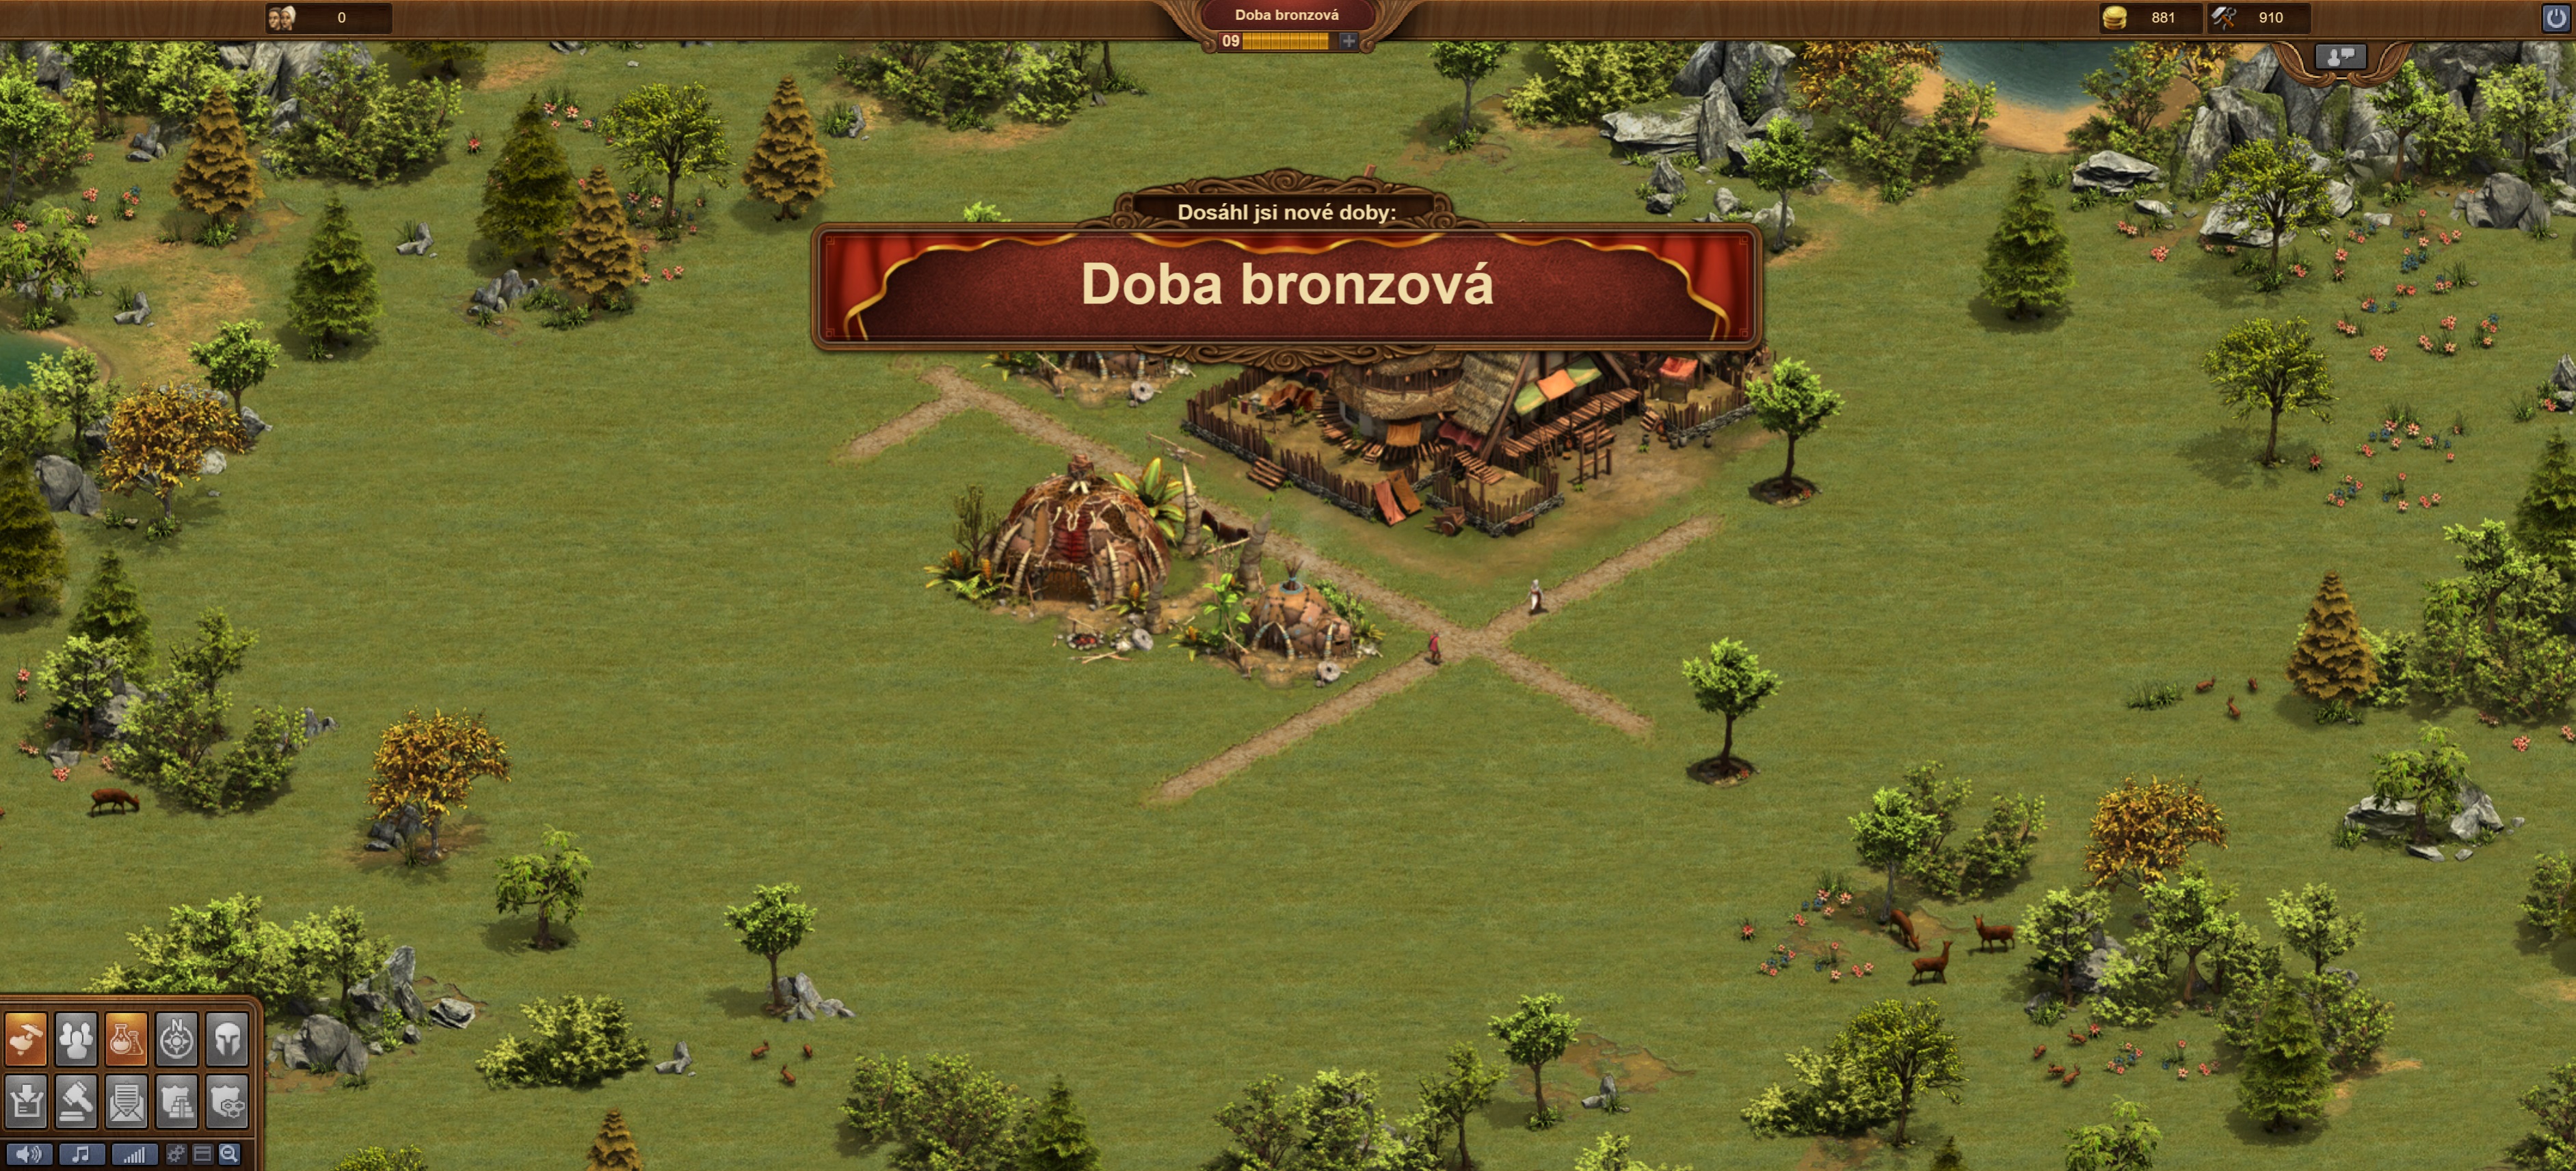 forge of empires best way to level a gb with a level 80 arc